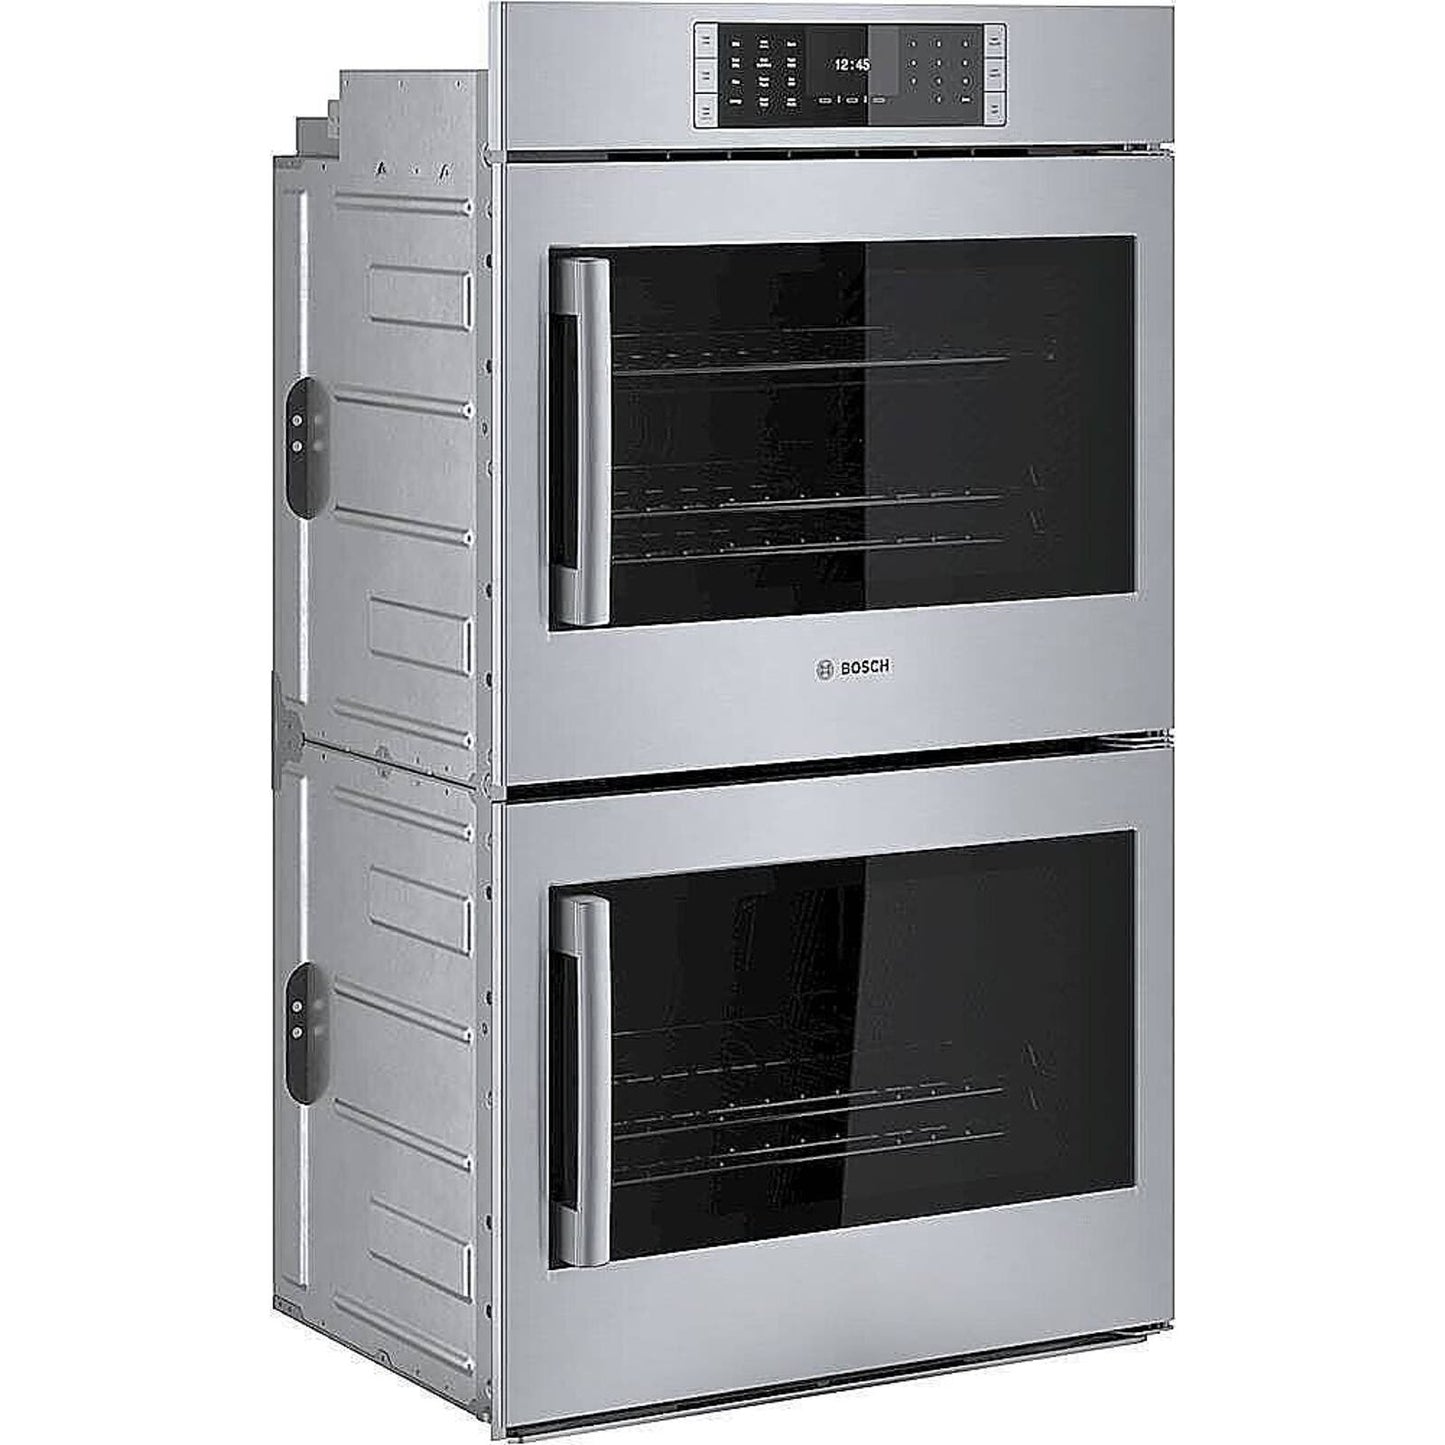 Bosch HBLP651LUC Benchmark Series 30" Stainless Steel Double Wall Oven